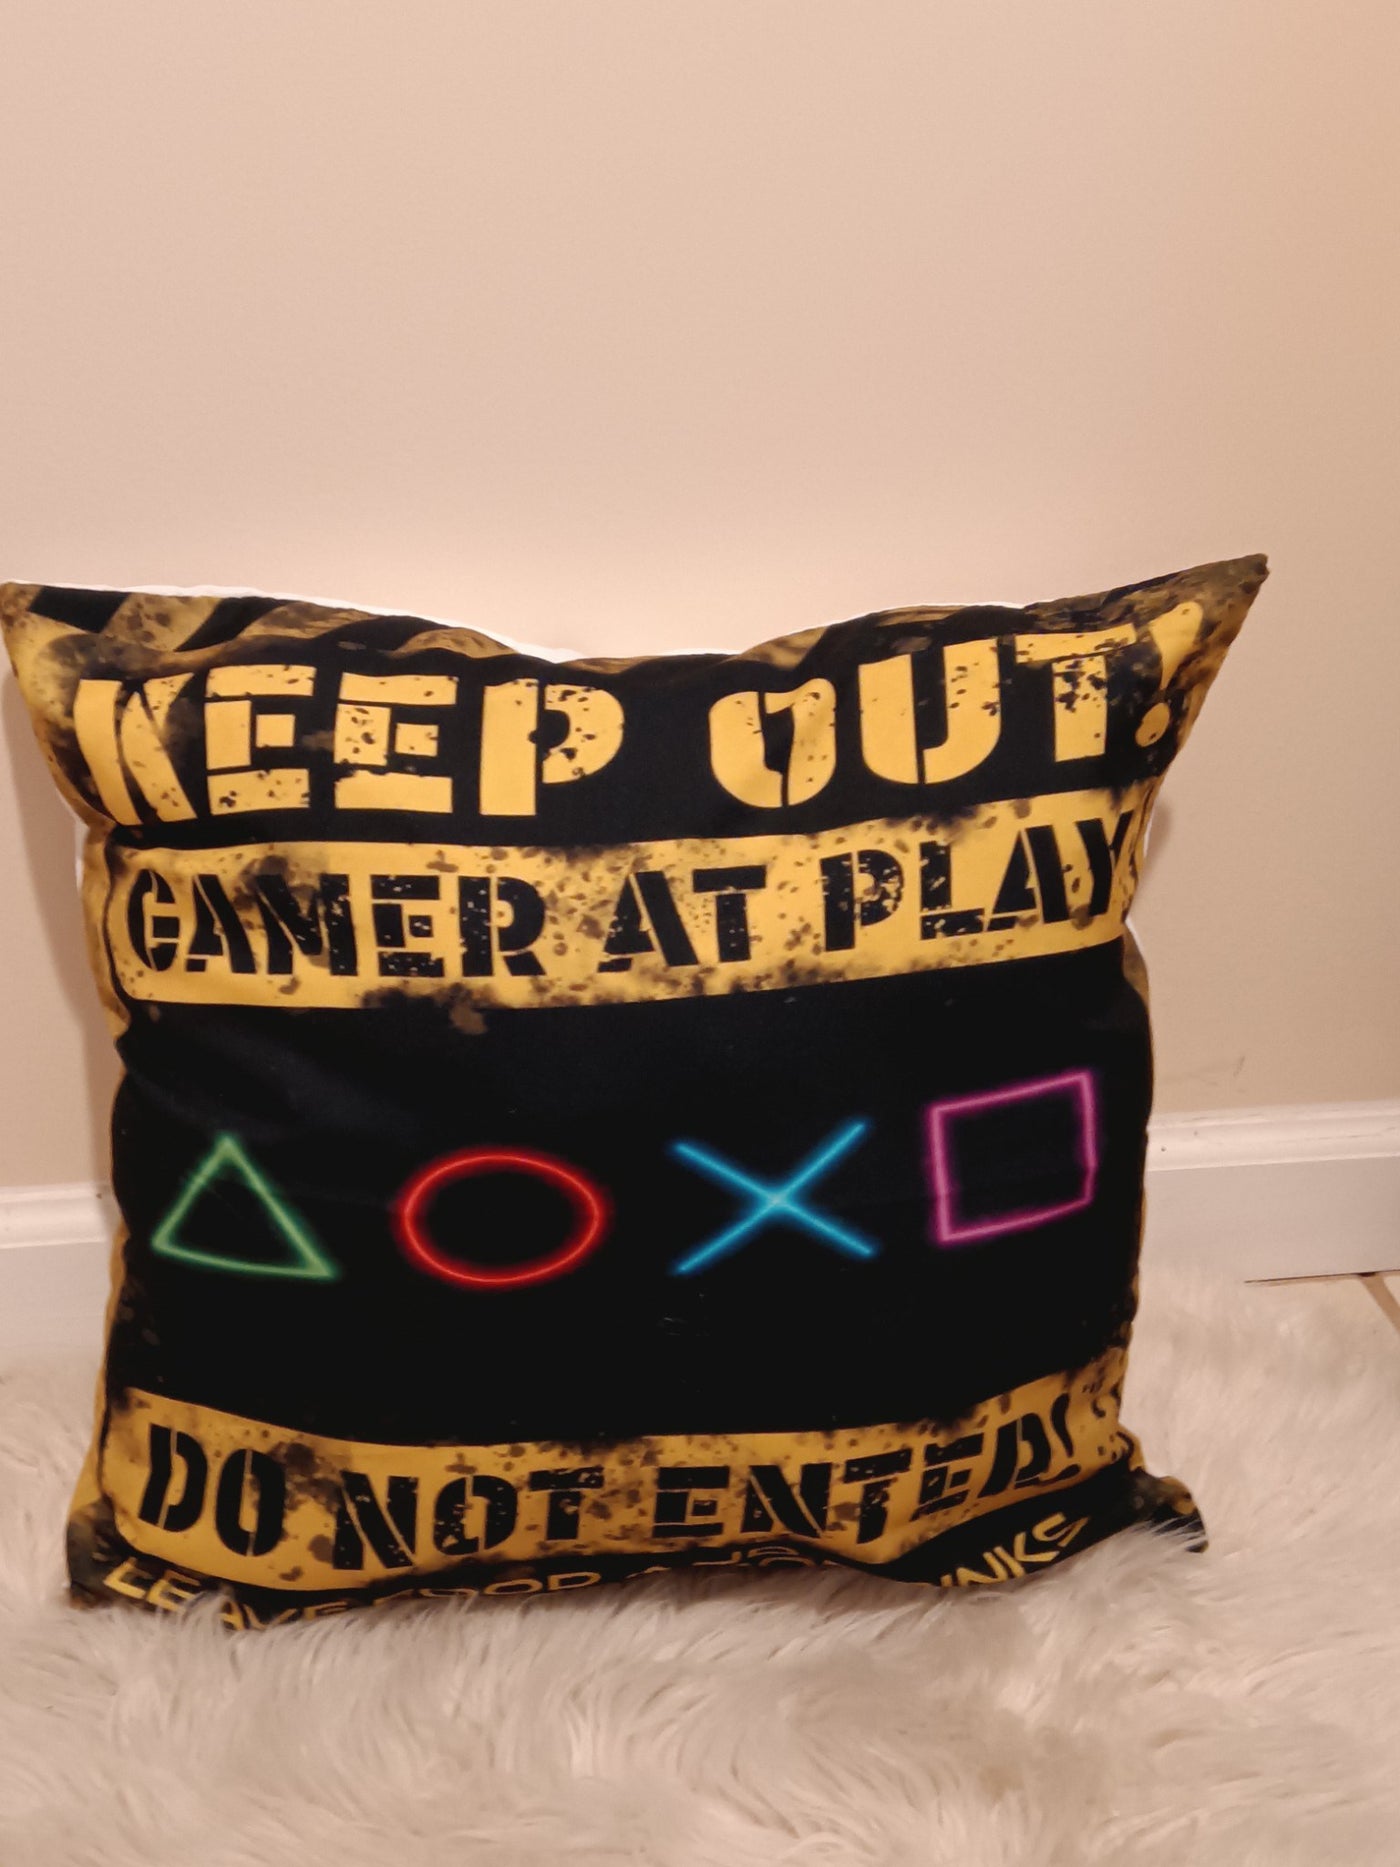 Keep Out Gamer at Play pillow